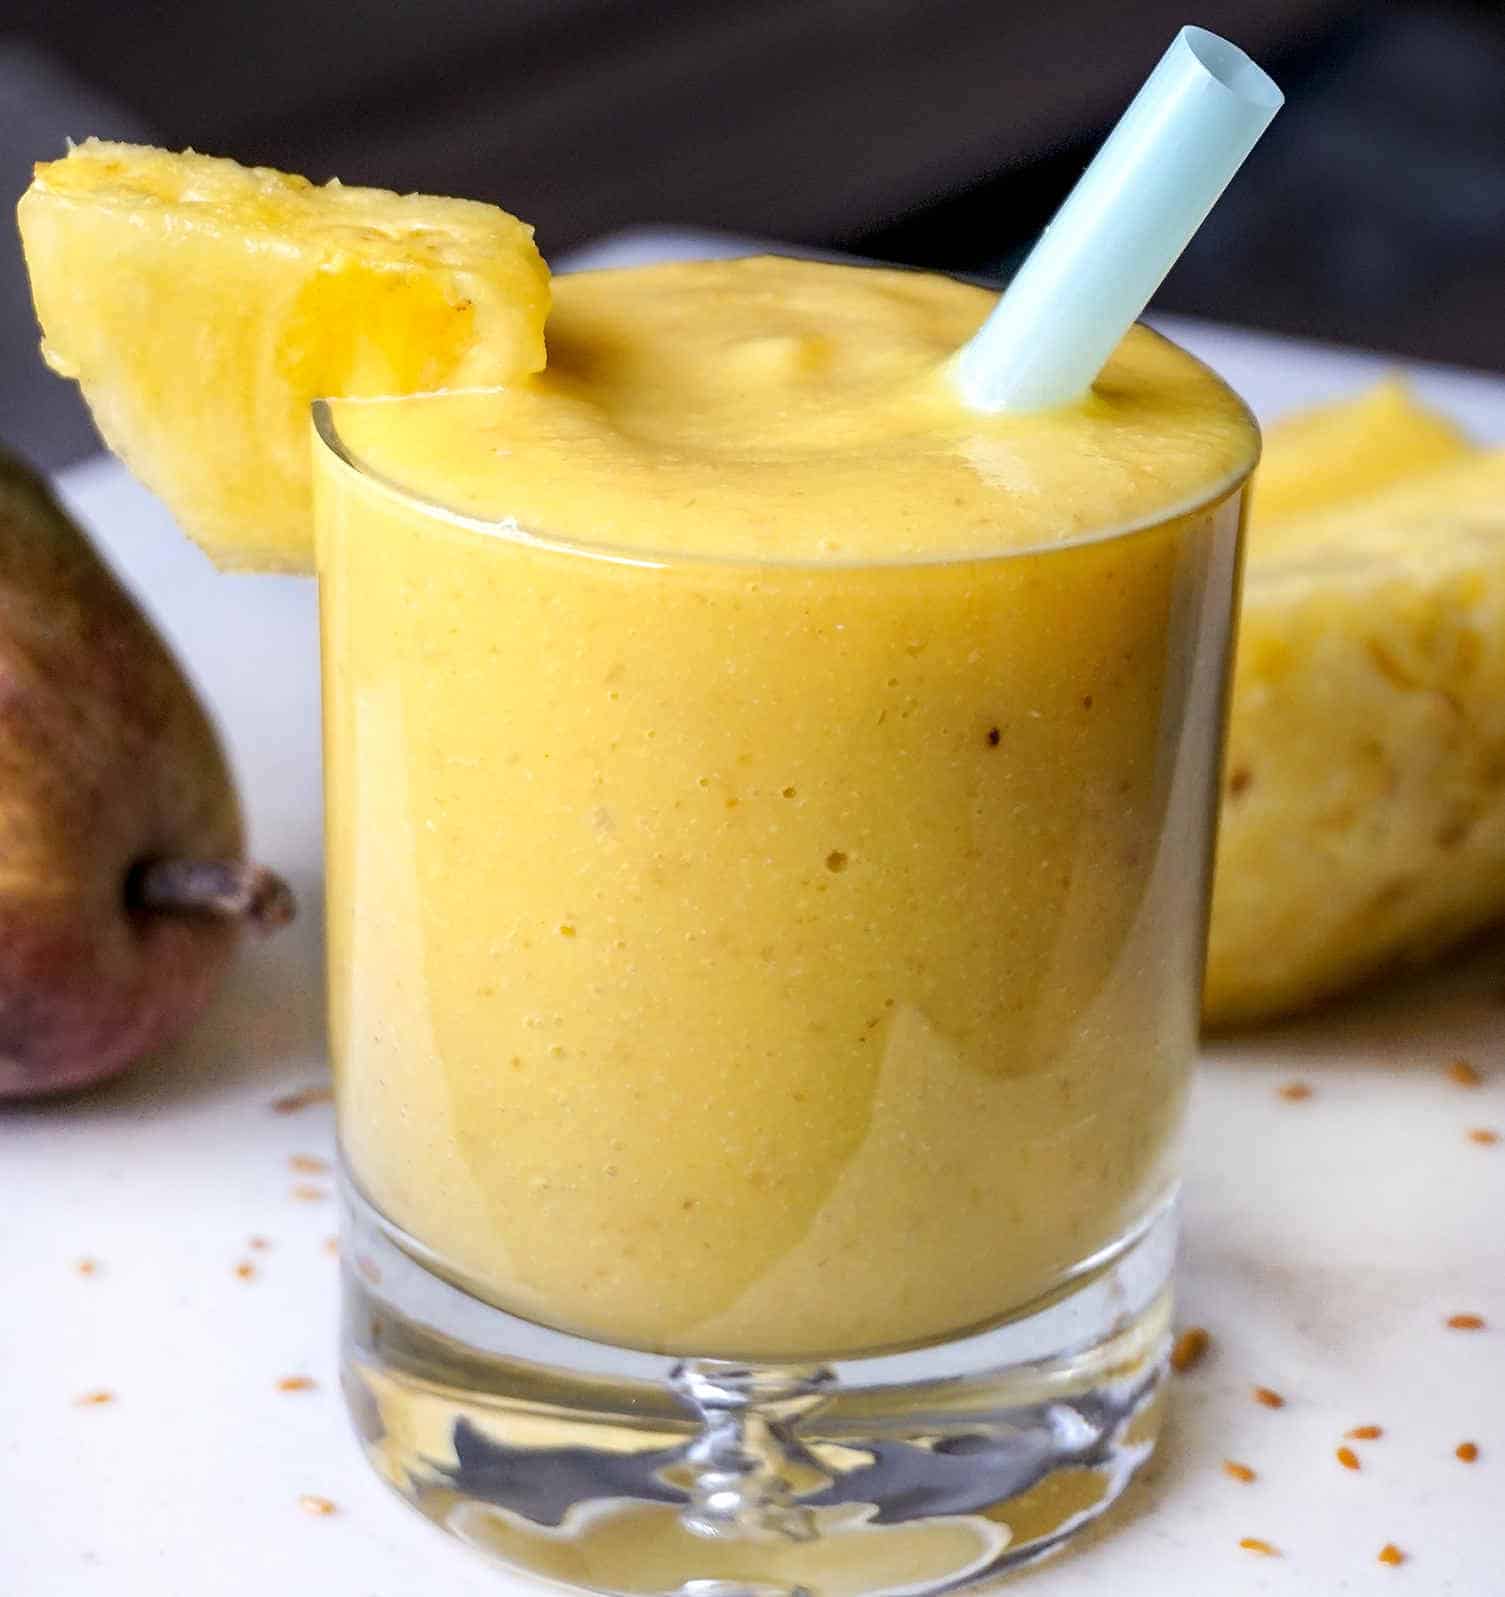 Healthy Anti-inflammatory Pineapple Smoothie Without Dairy.